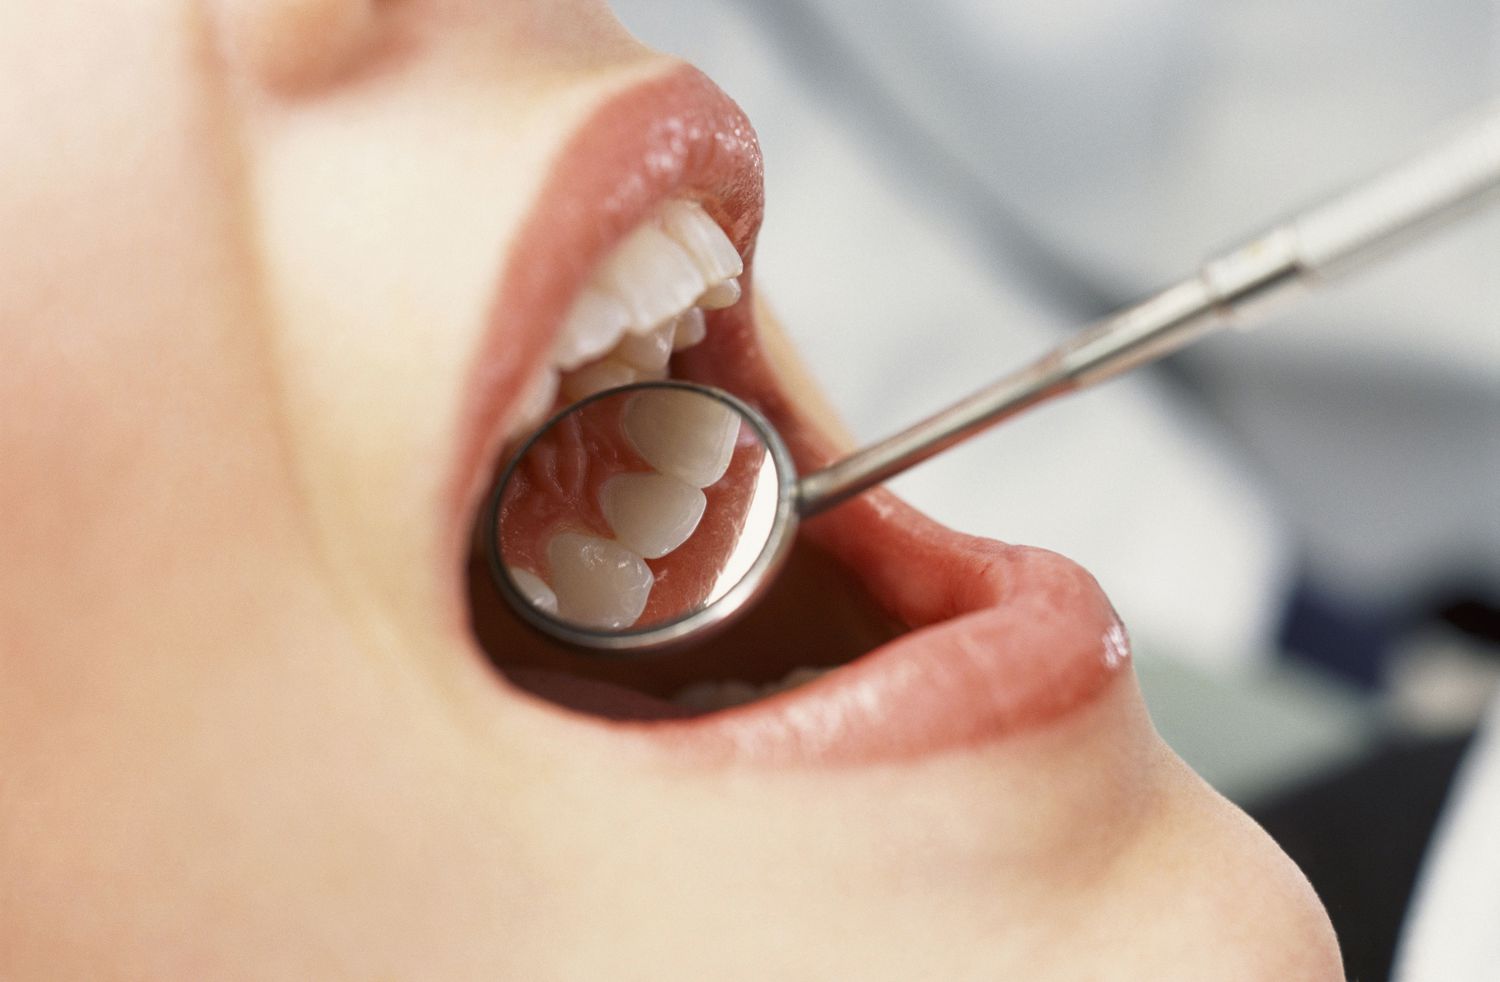 What Are The Major Dental Problems?